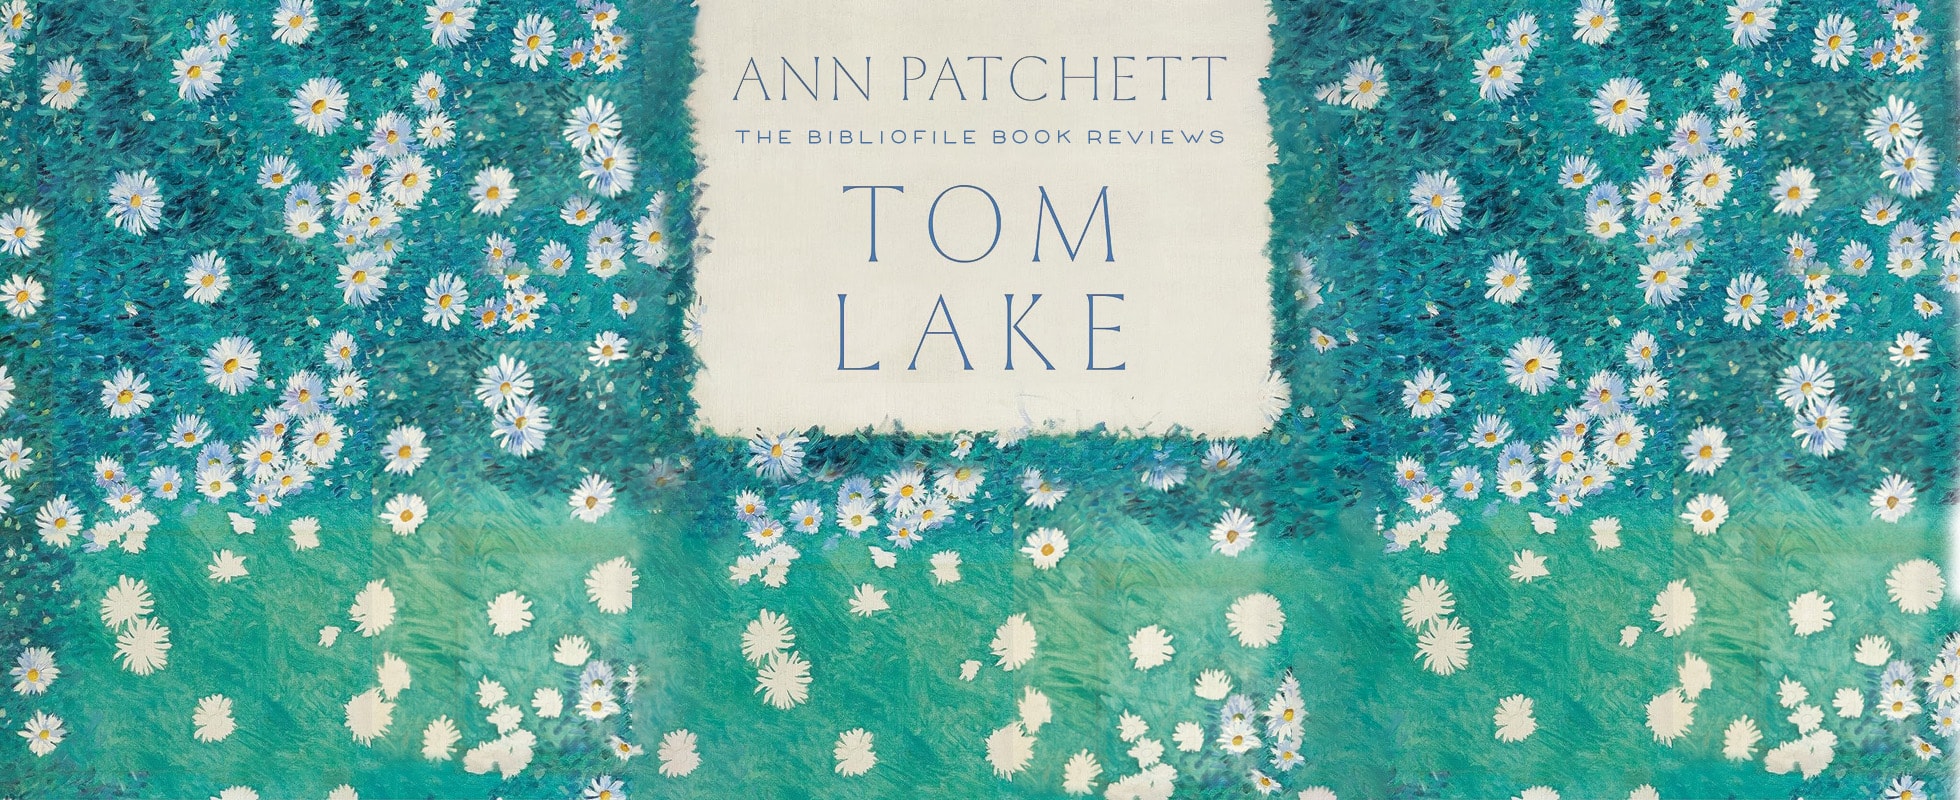 Tom Lake by Ann Patchett book review plot summary synopsis recap discussion questions spoilers